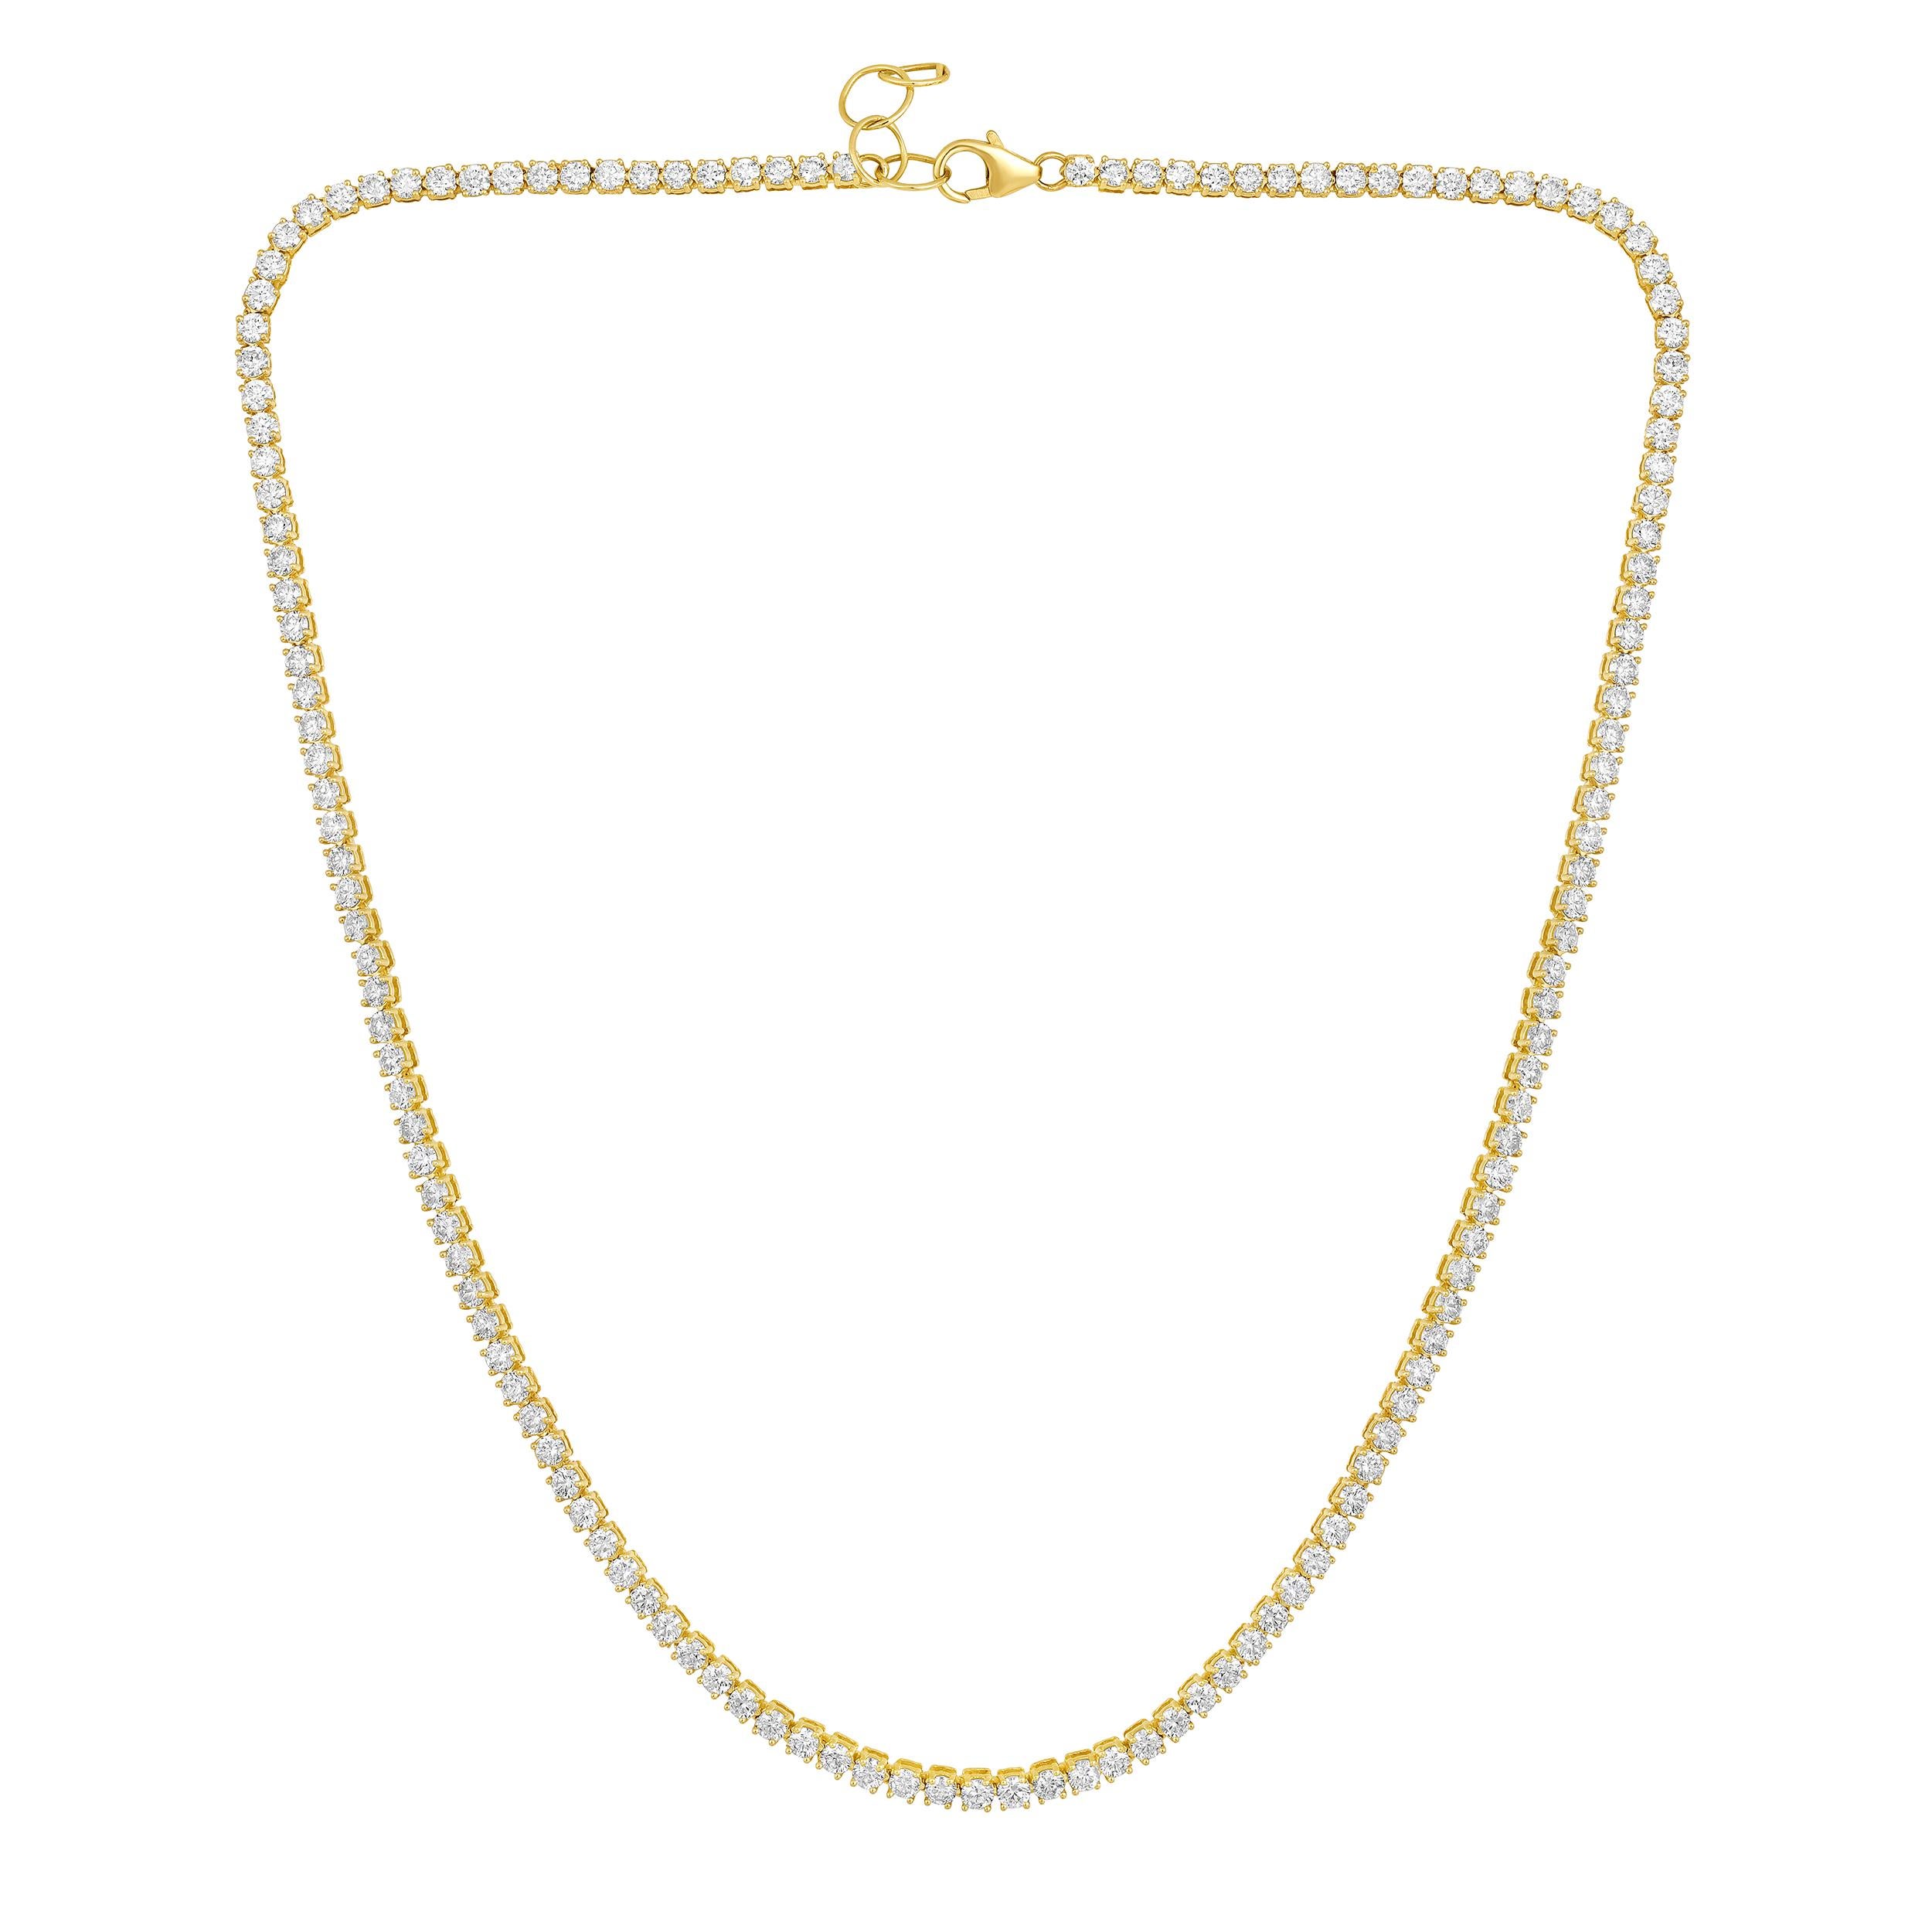 Crafted in 10.57 grams of 14K Yellow Gold, the necklace contains 140 stones of Round Diamonds with a total of 6.1 carat in F-G color and VS-SI carat. The necklace length is 16 inches.

This jewelry piece will be expertly crafted by our skilled